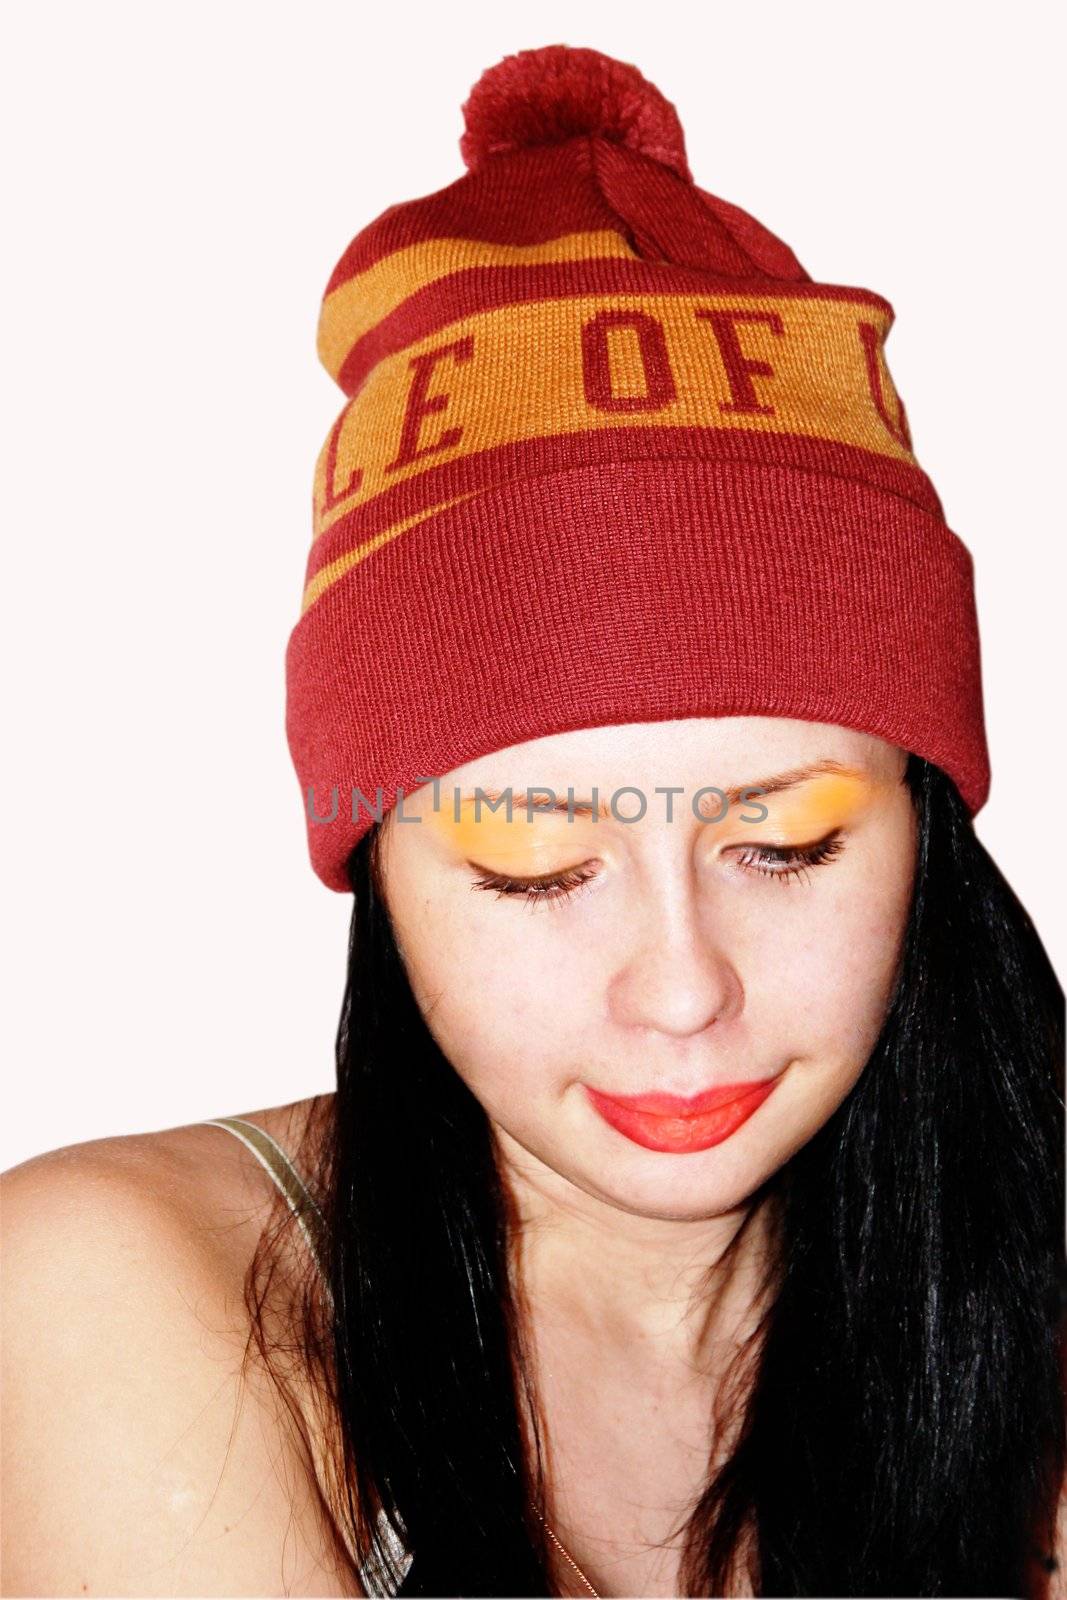 girl in a sports cap wiyh make-up thinking